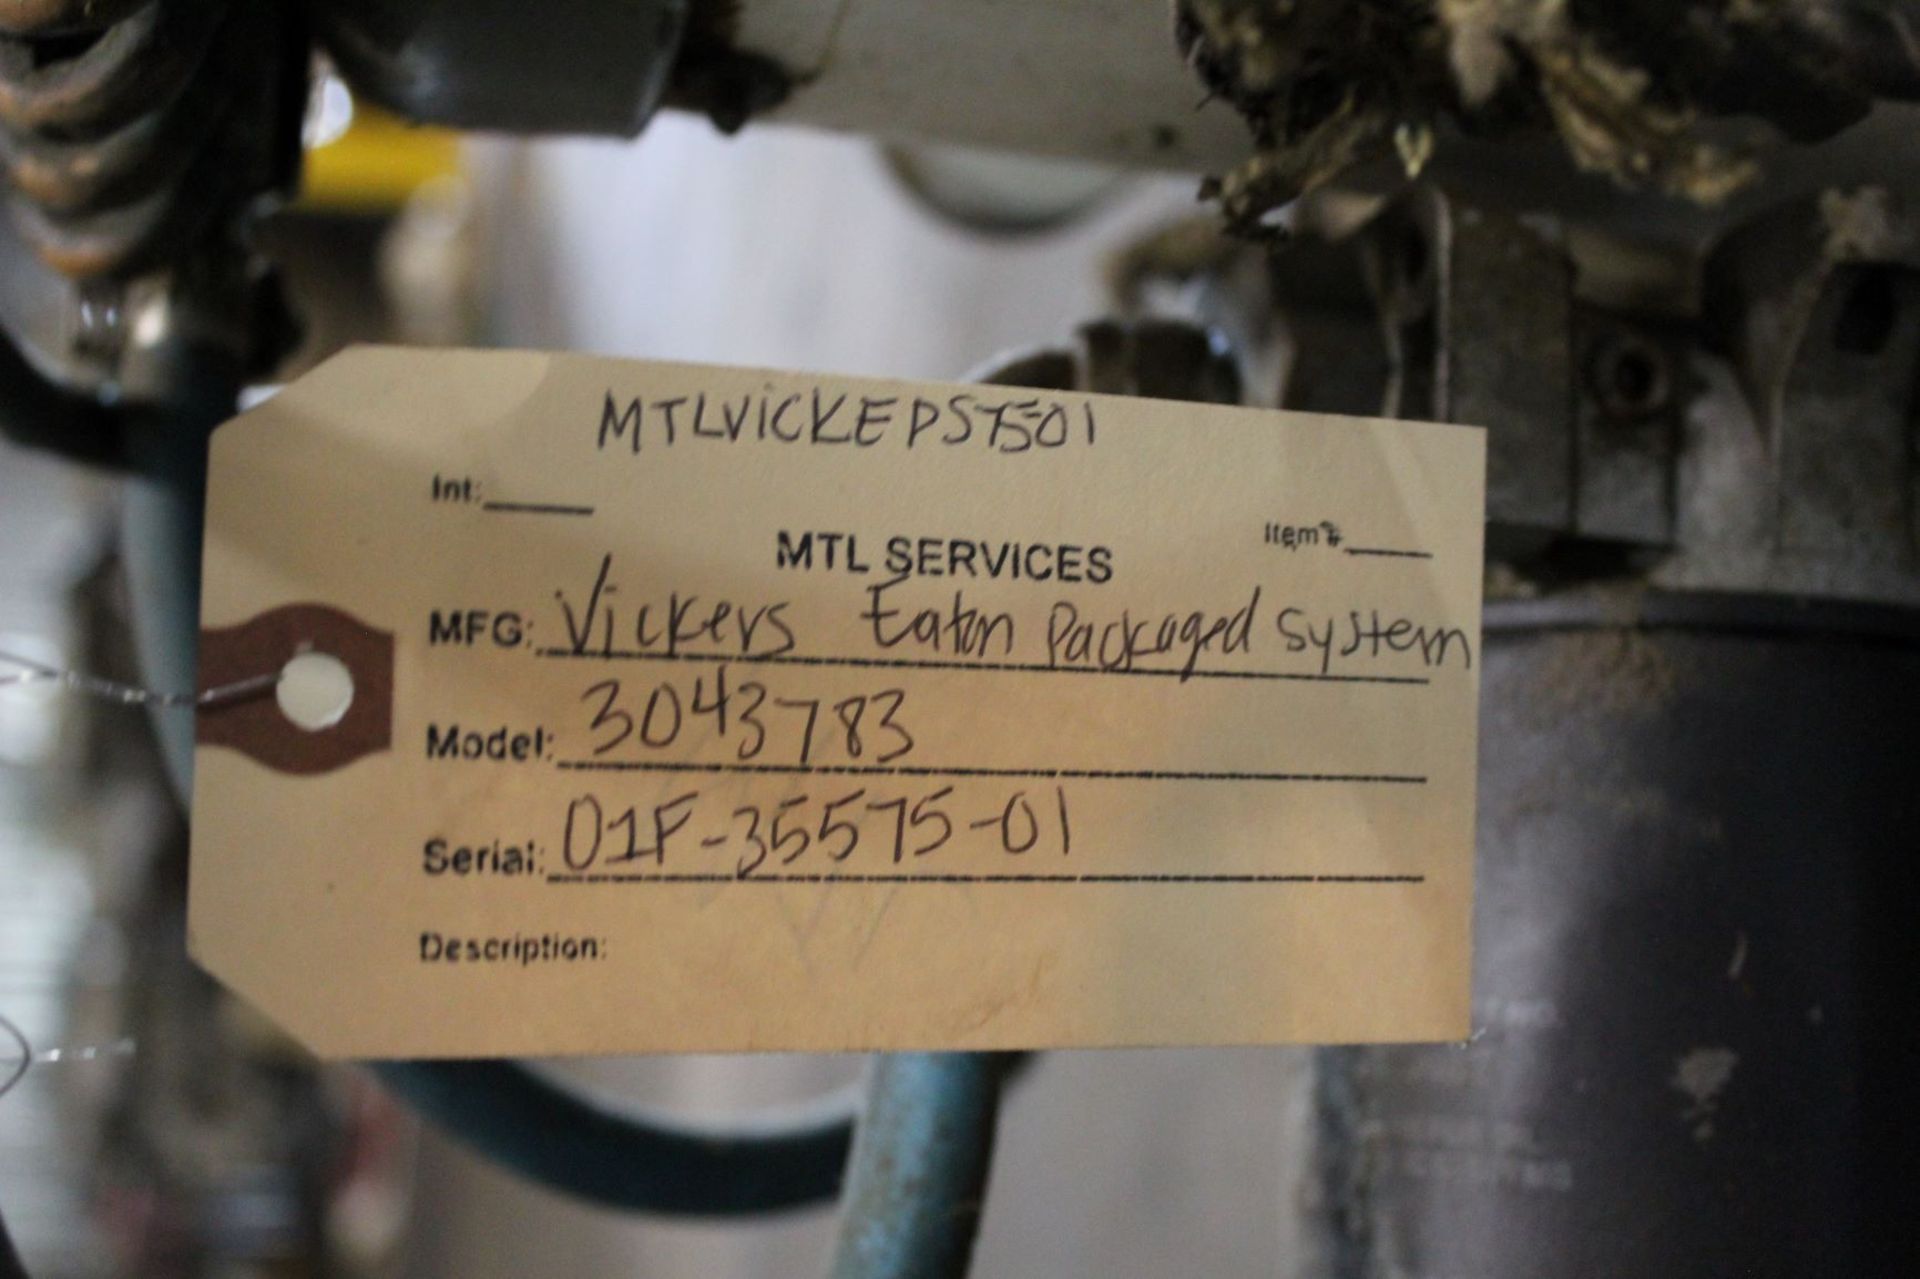 Vickers Eaton Packaged System, Model # 3043783, Serial# 01F-35575-01, Item# mtlvickeps75-01, Located - Image 3 of 3